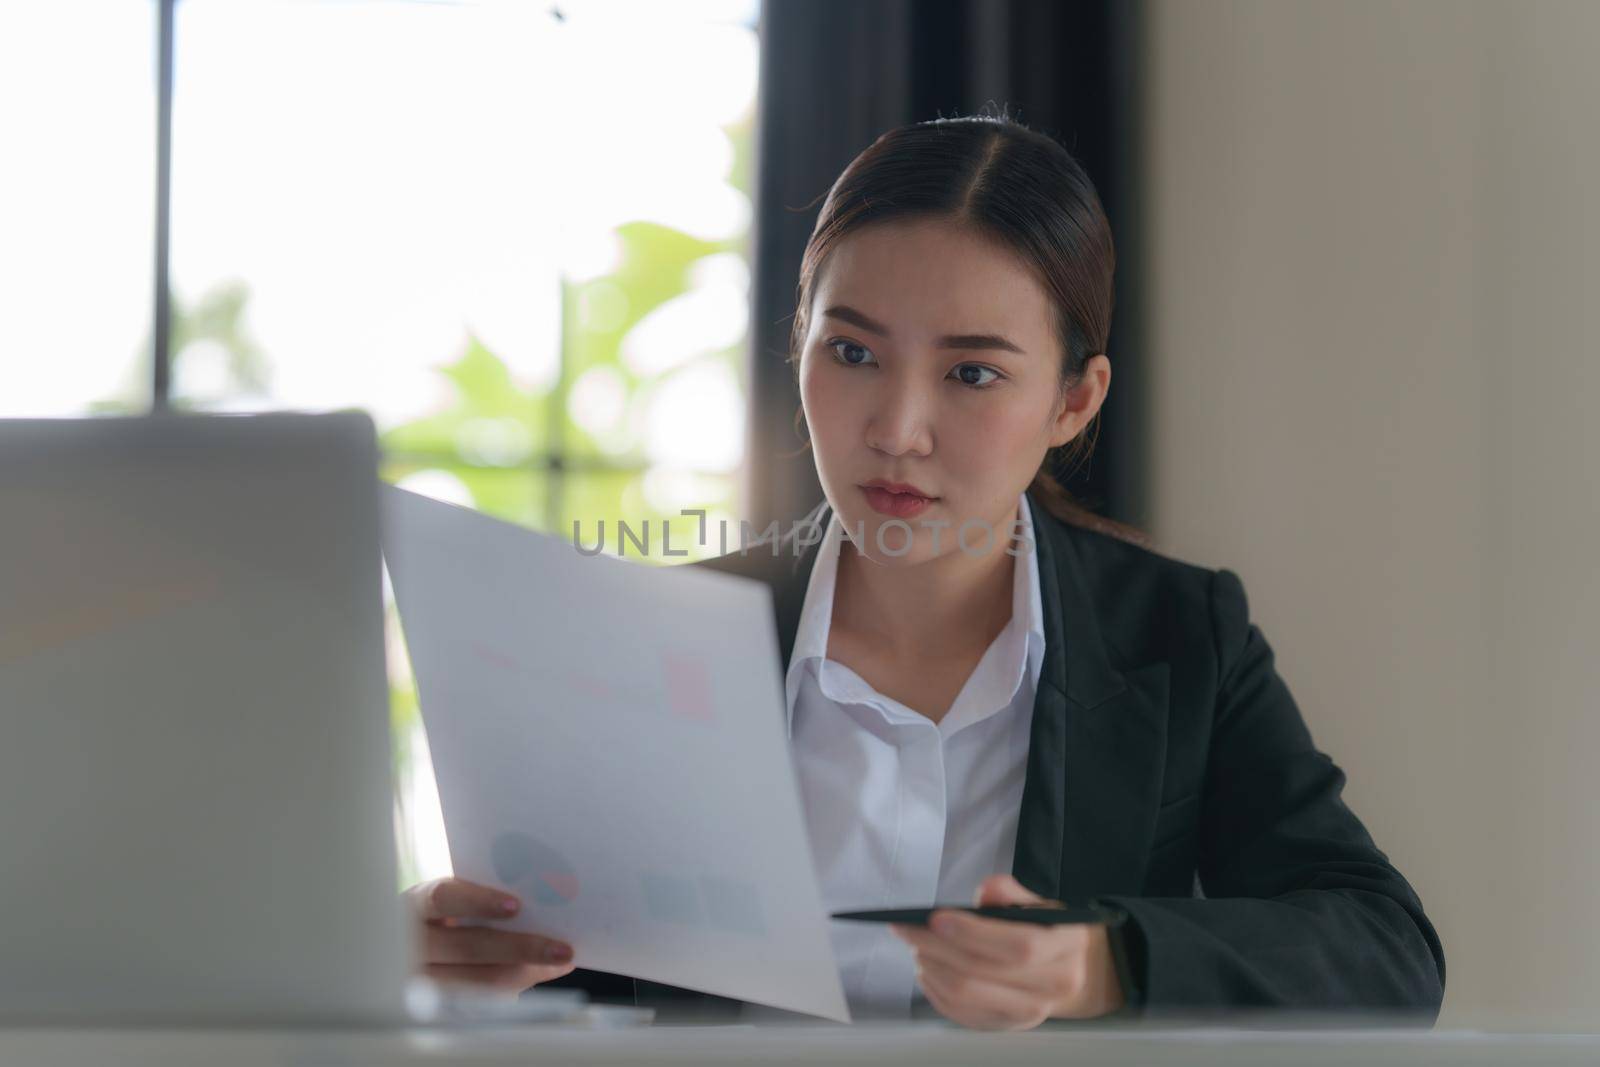 Fund investment concept. Stressed Business woman using finance application by itchaznong